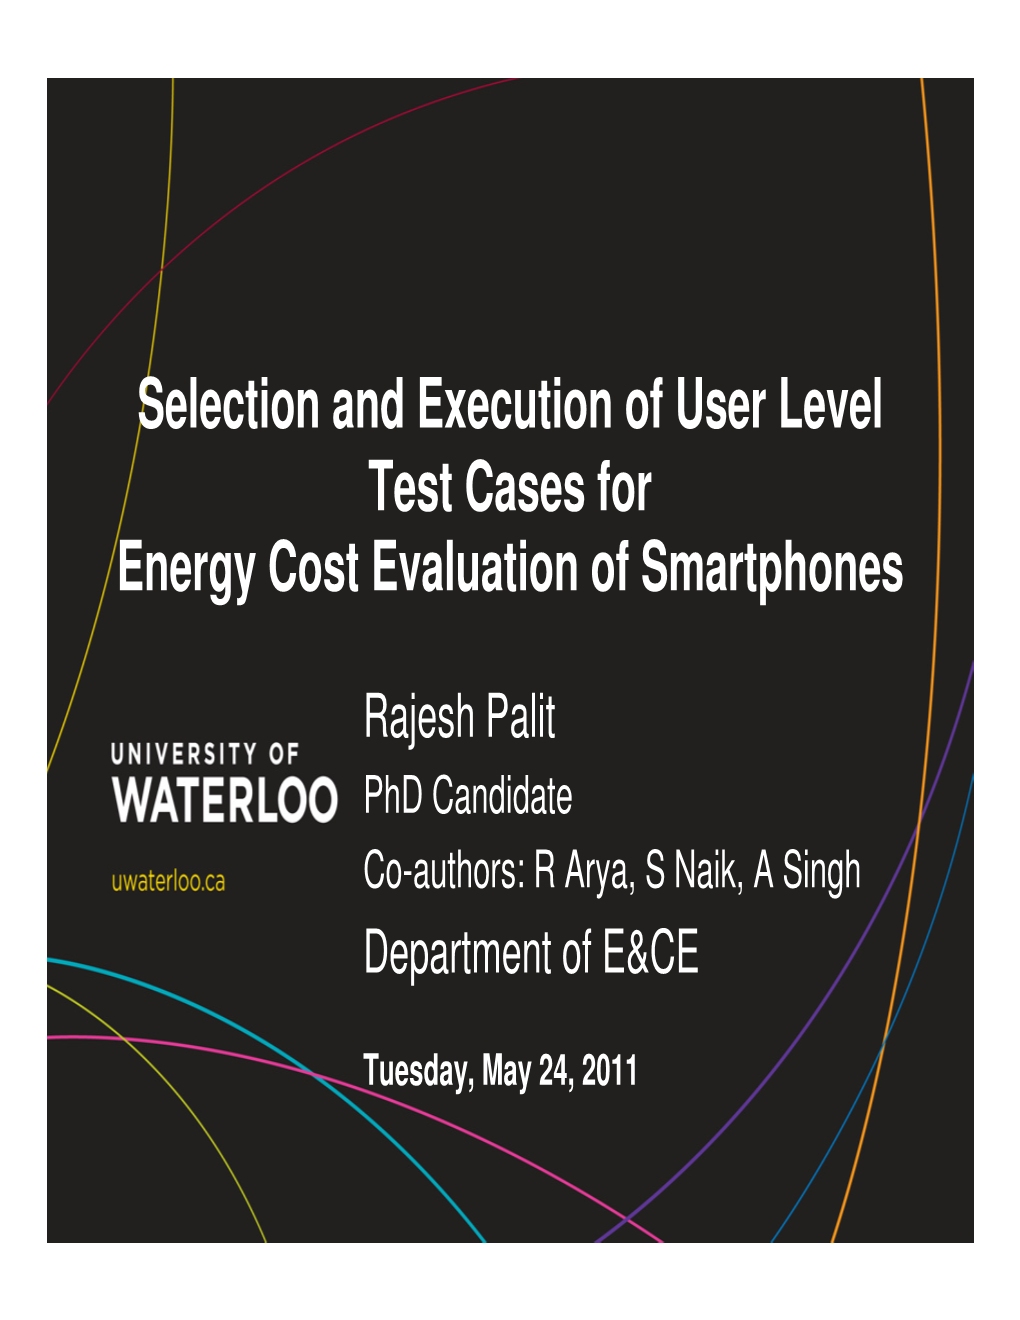 Selection and Execution of User Level Test Cases for Energy Cost Evaluation of Smartphones